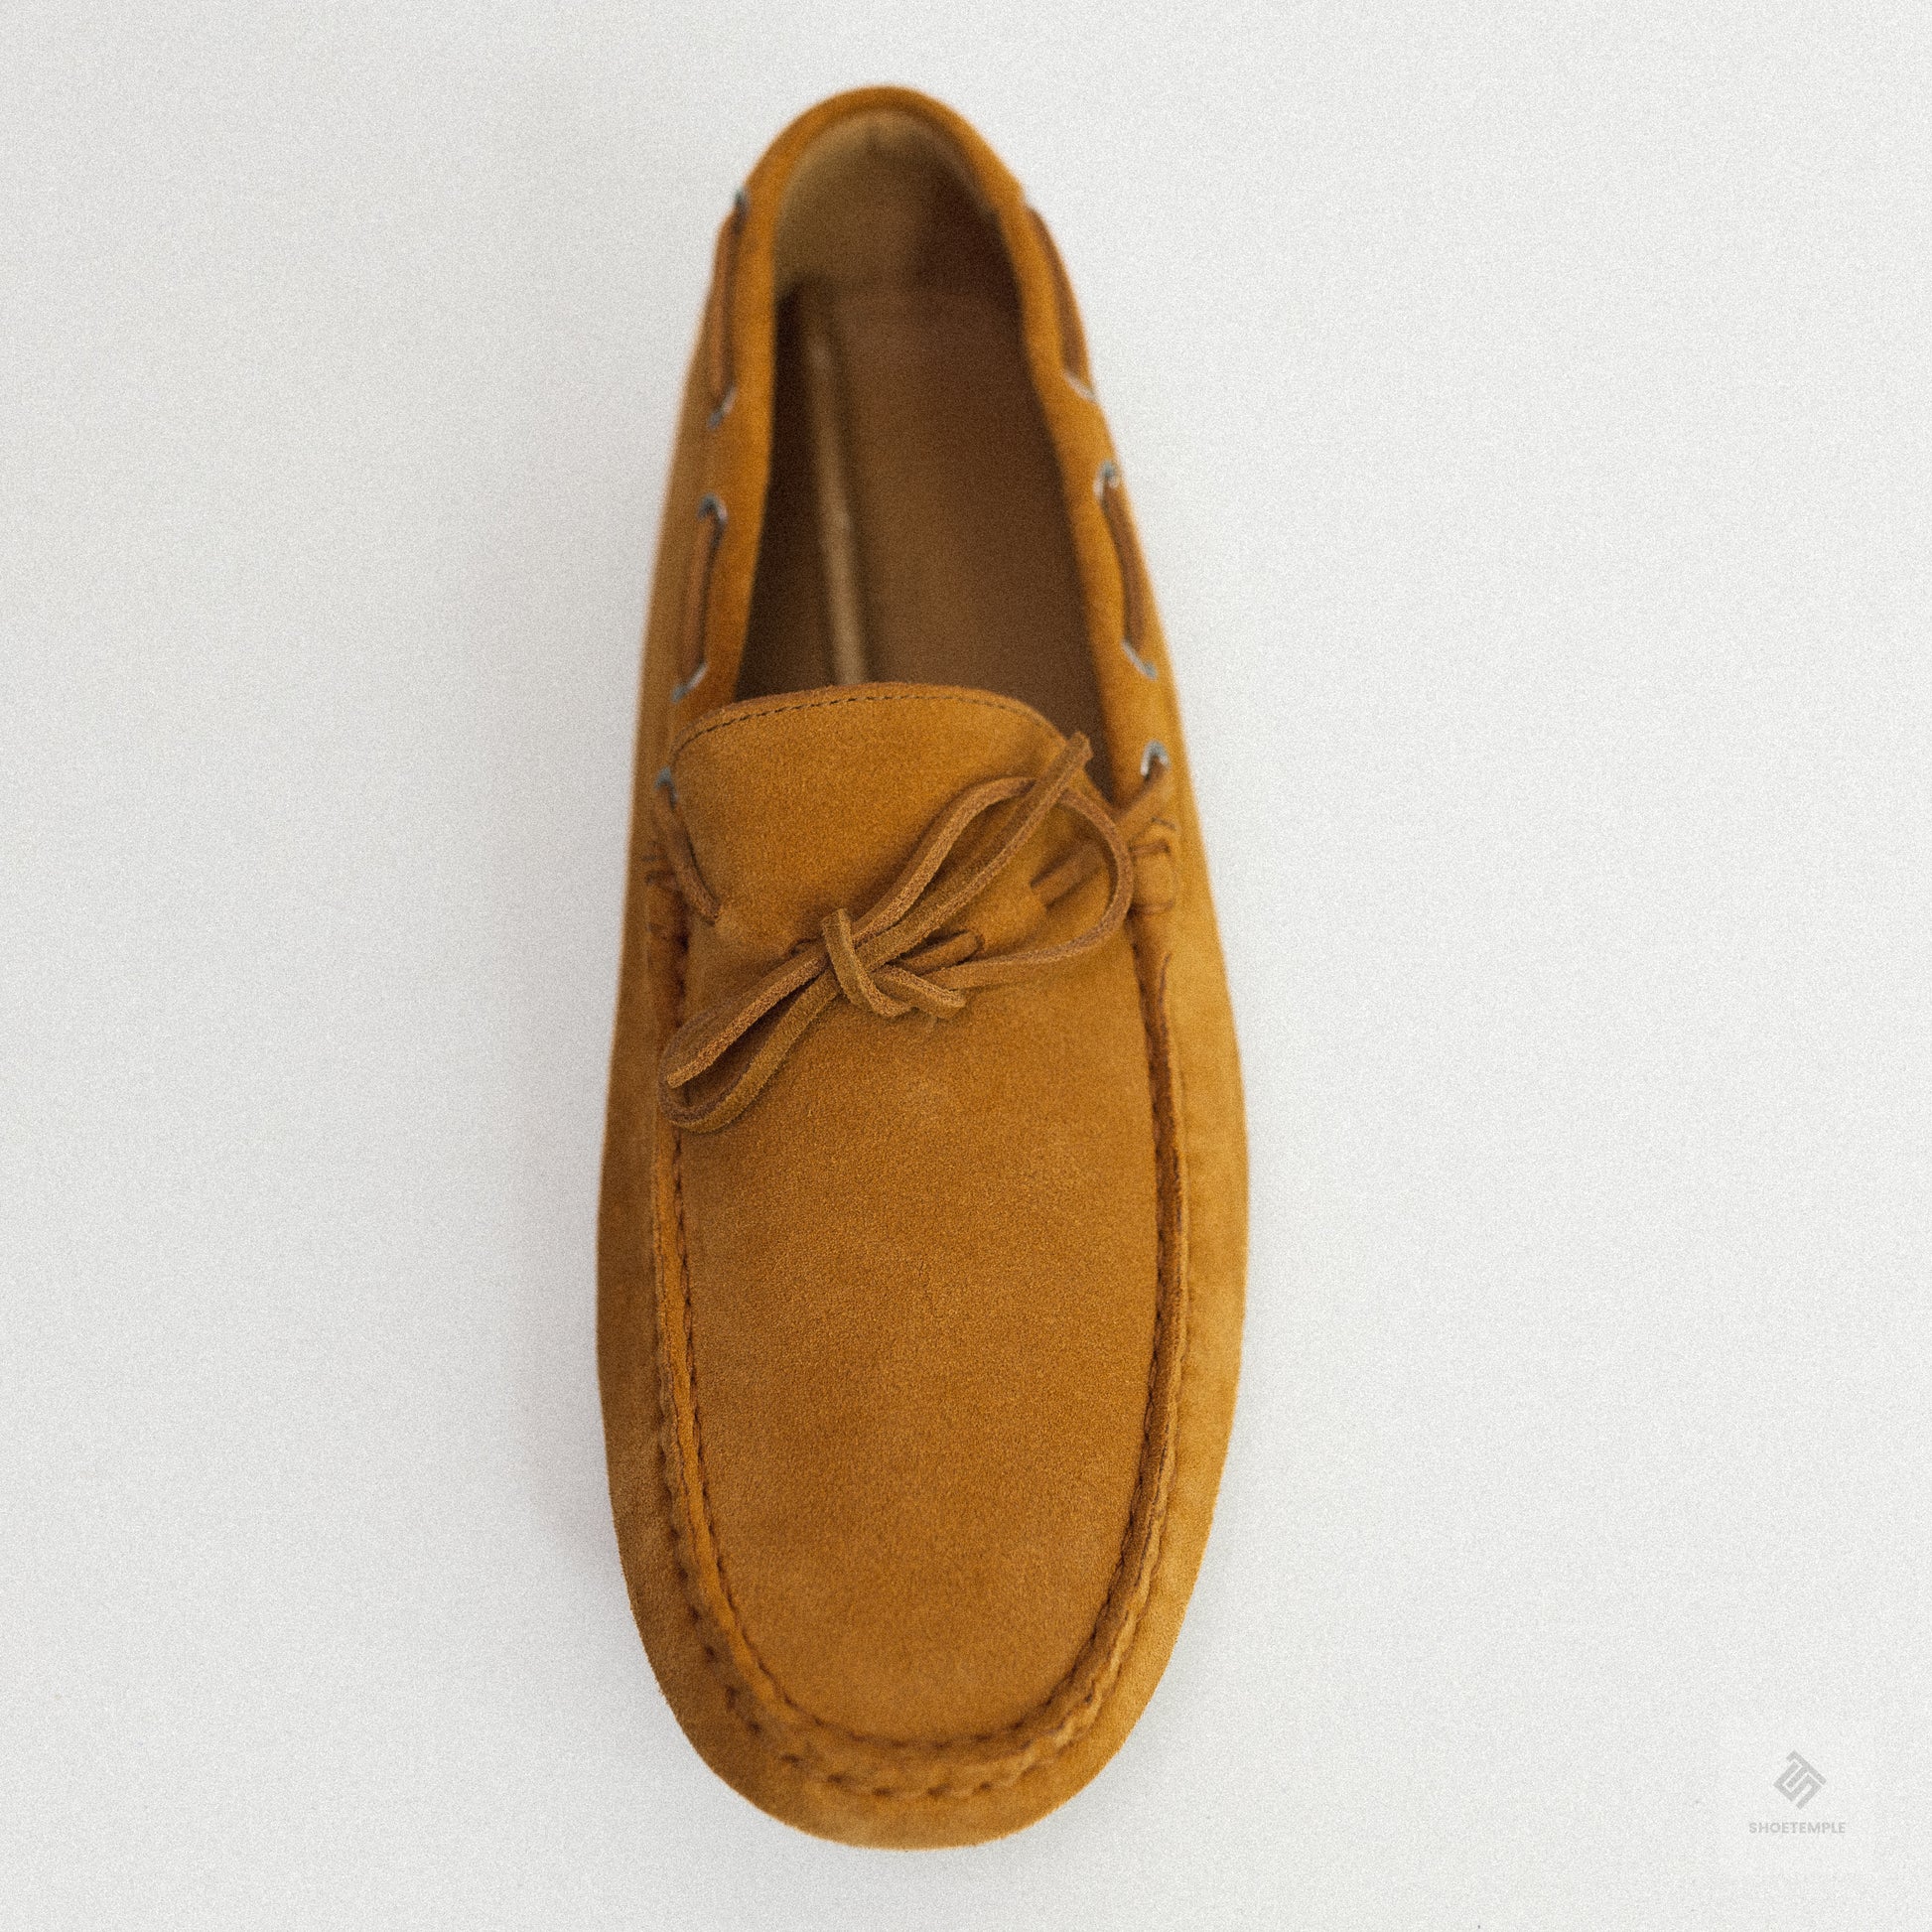 How to Wear Men's Boat Shoes - Aquila